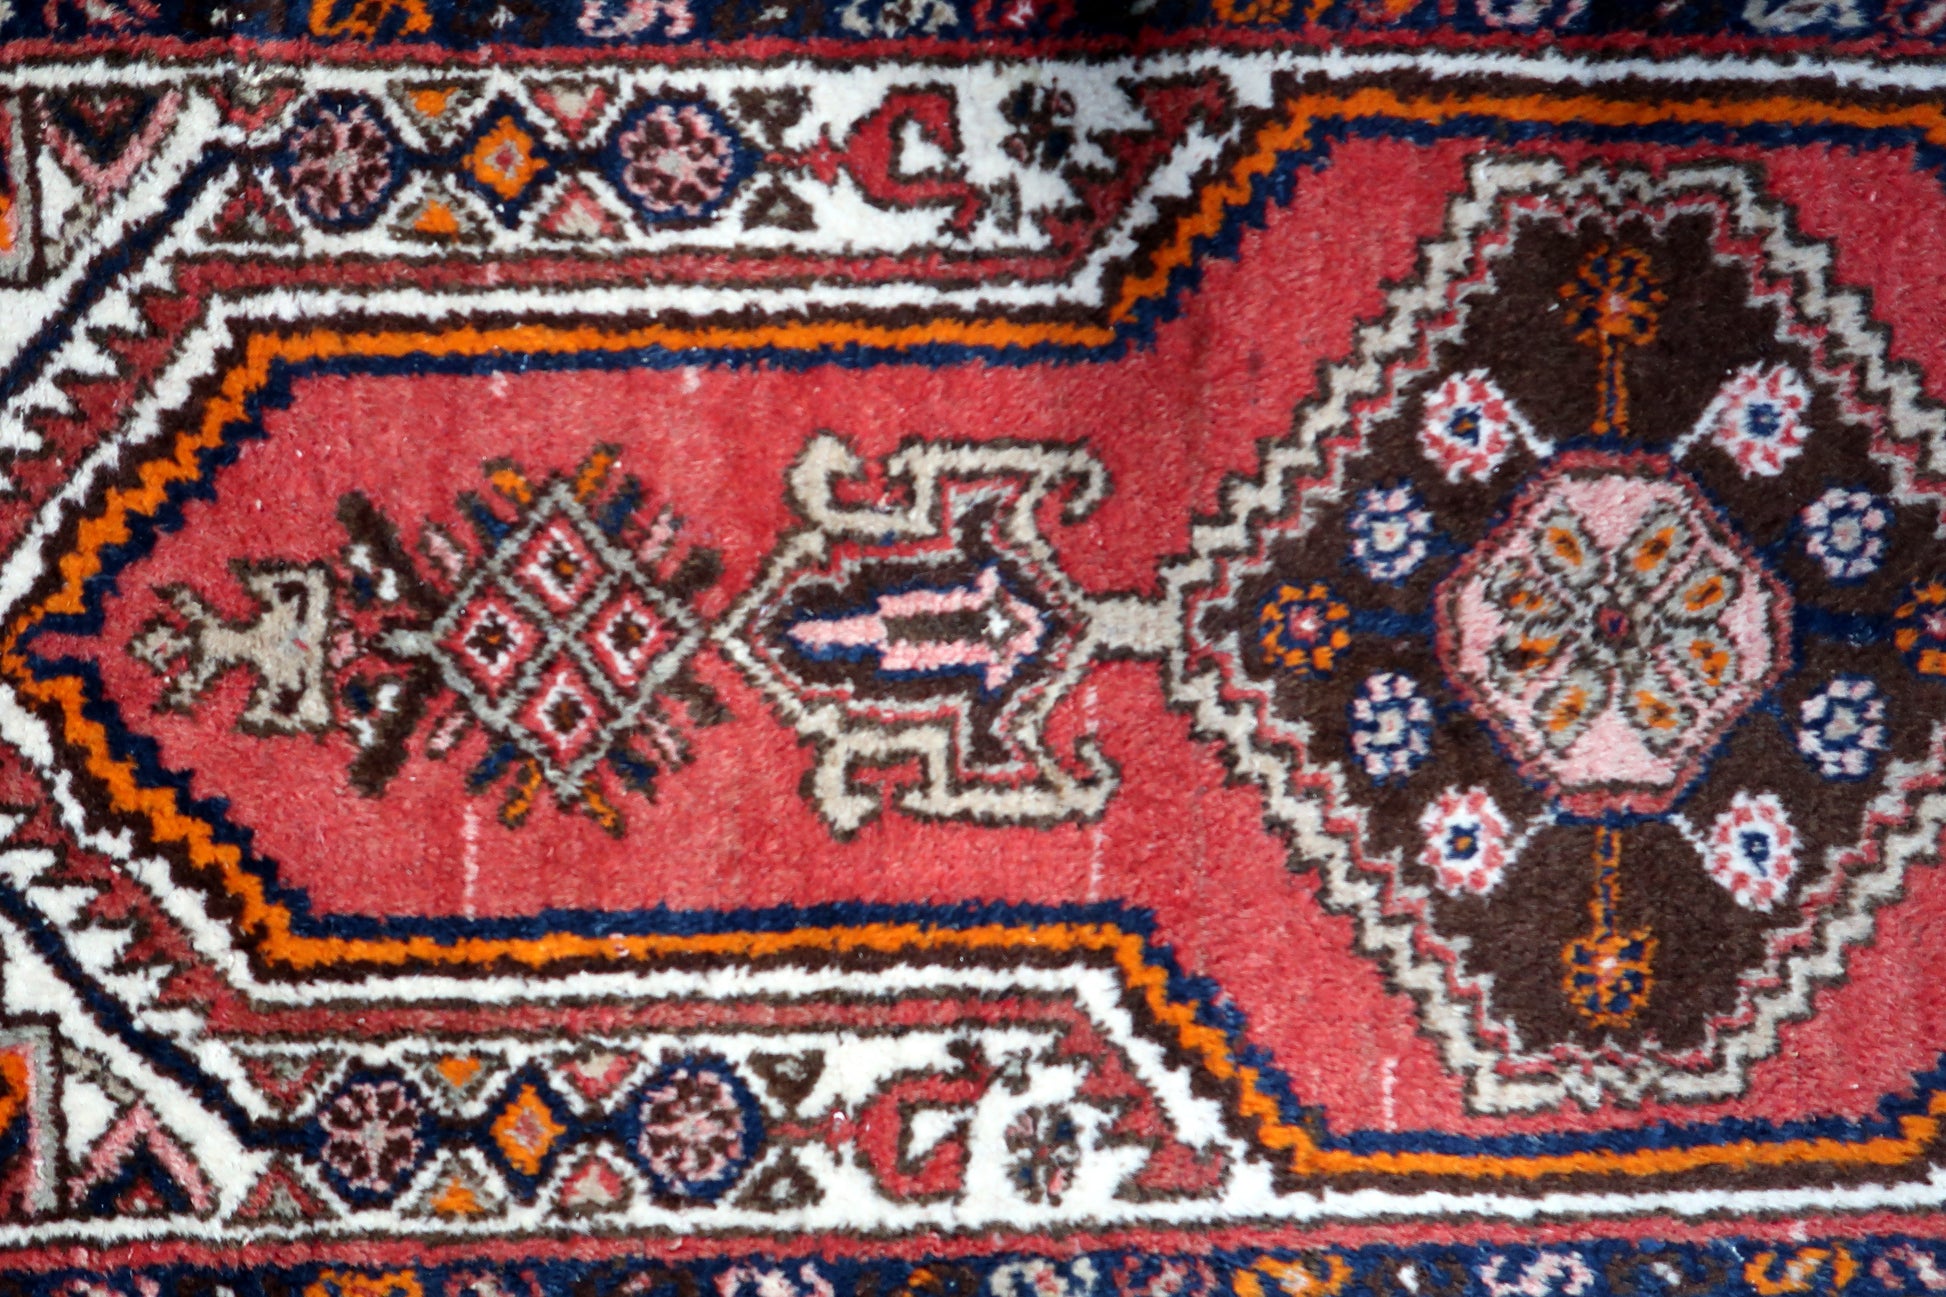 Close-up view capturing the vibrant orange hues and geometric patterns on the rug